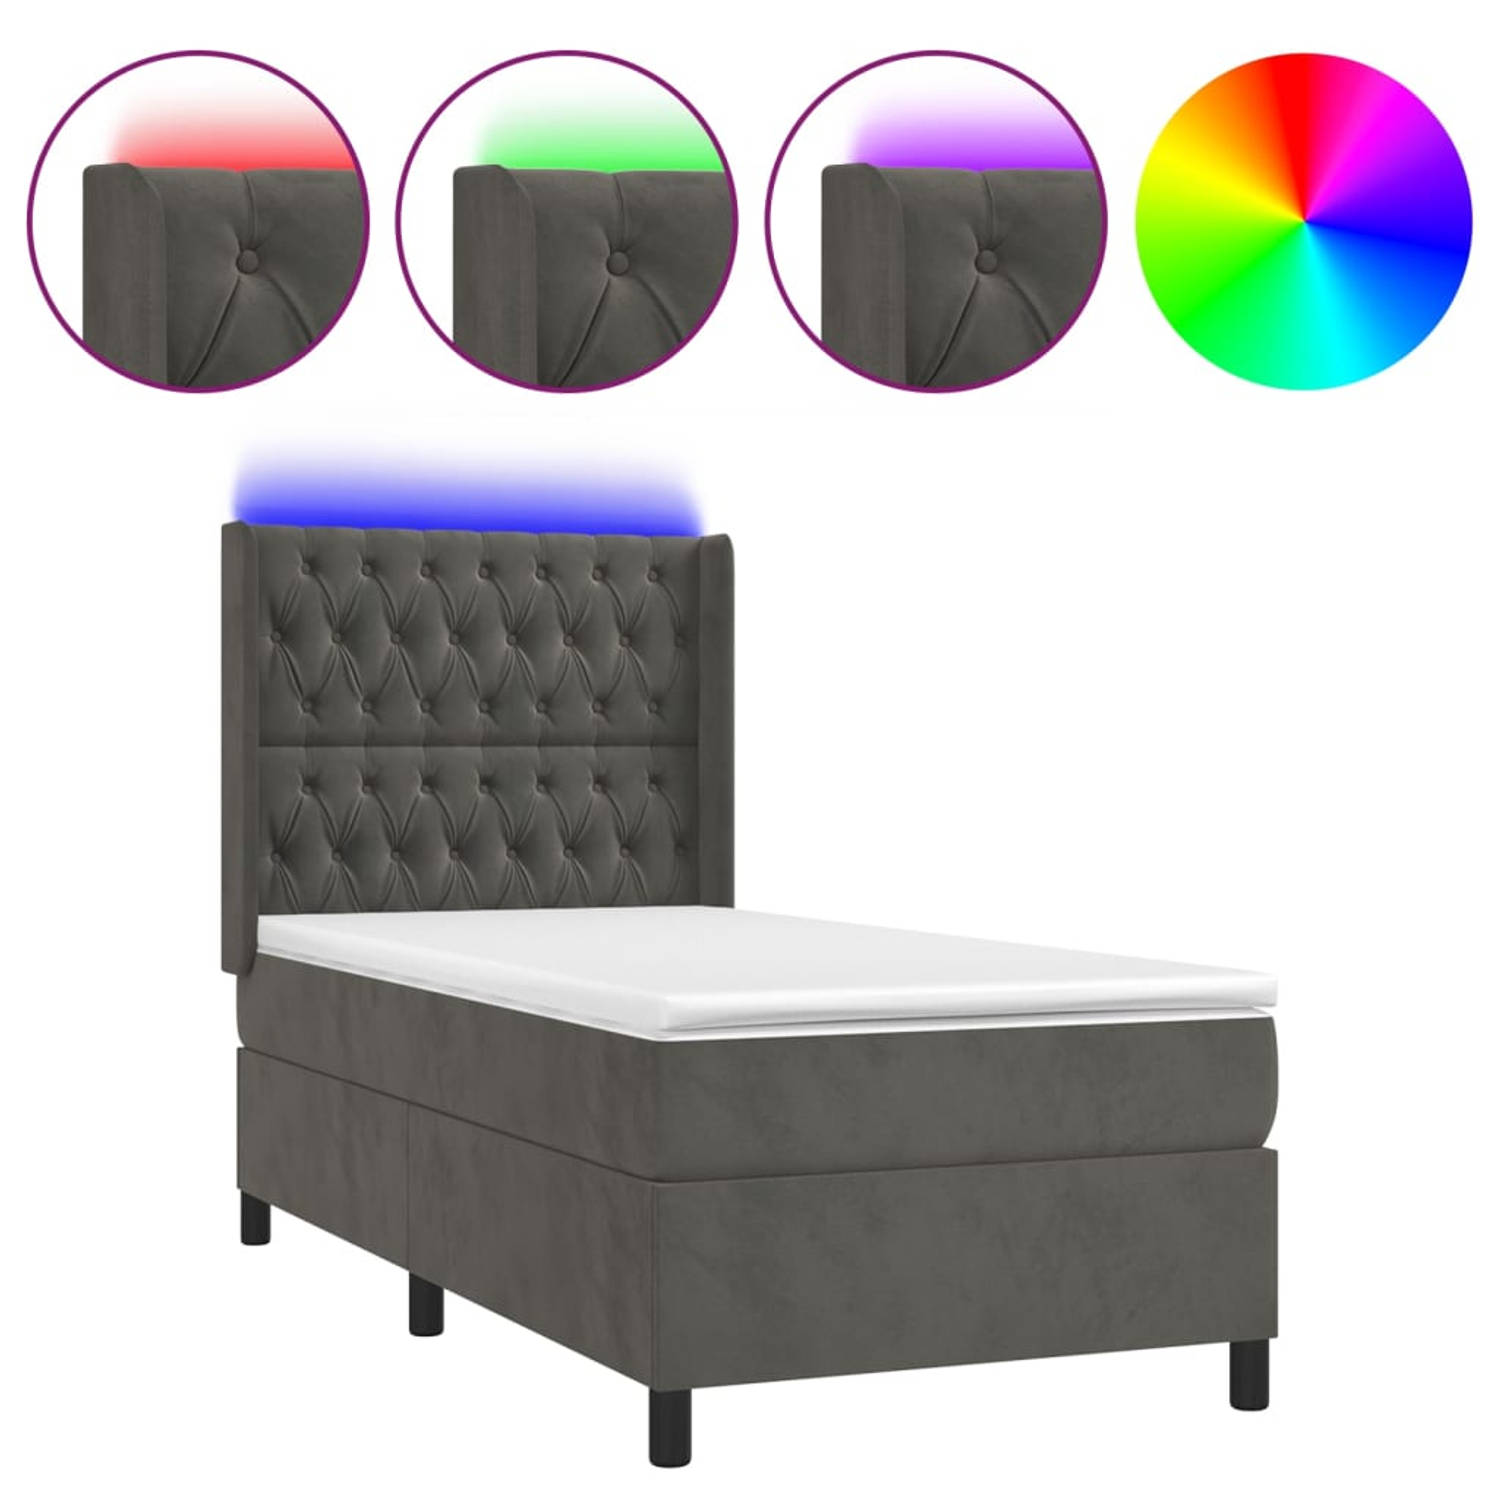 The Living Store Bed Boxspring - 203 x 83 x 118/128 cm - Donkergrijs Fluweel - Inclusief Matras en LED